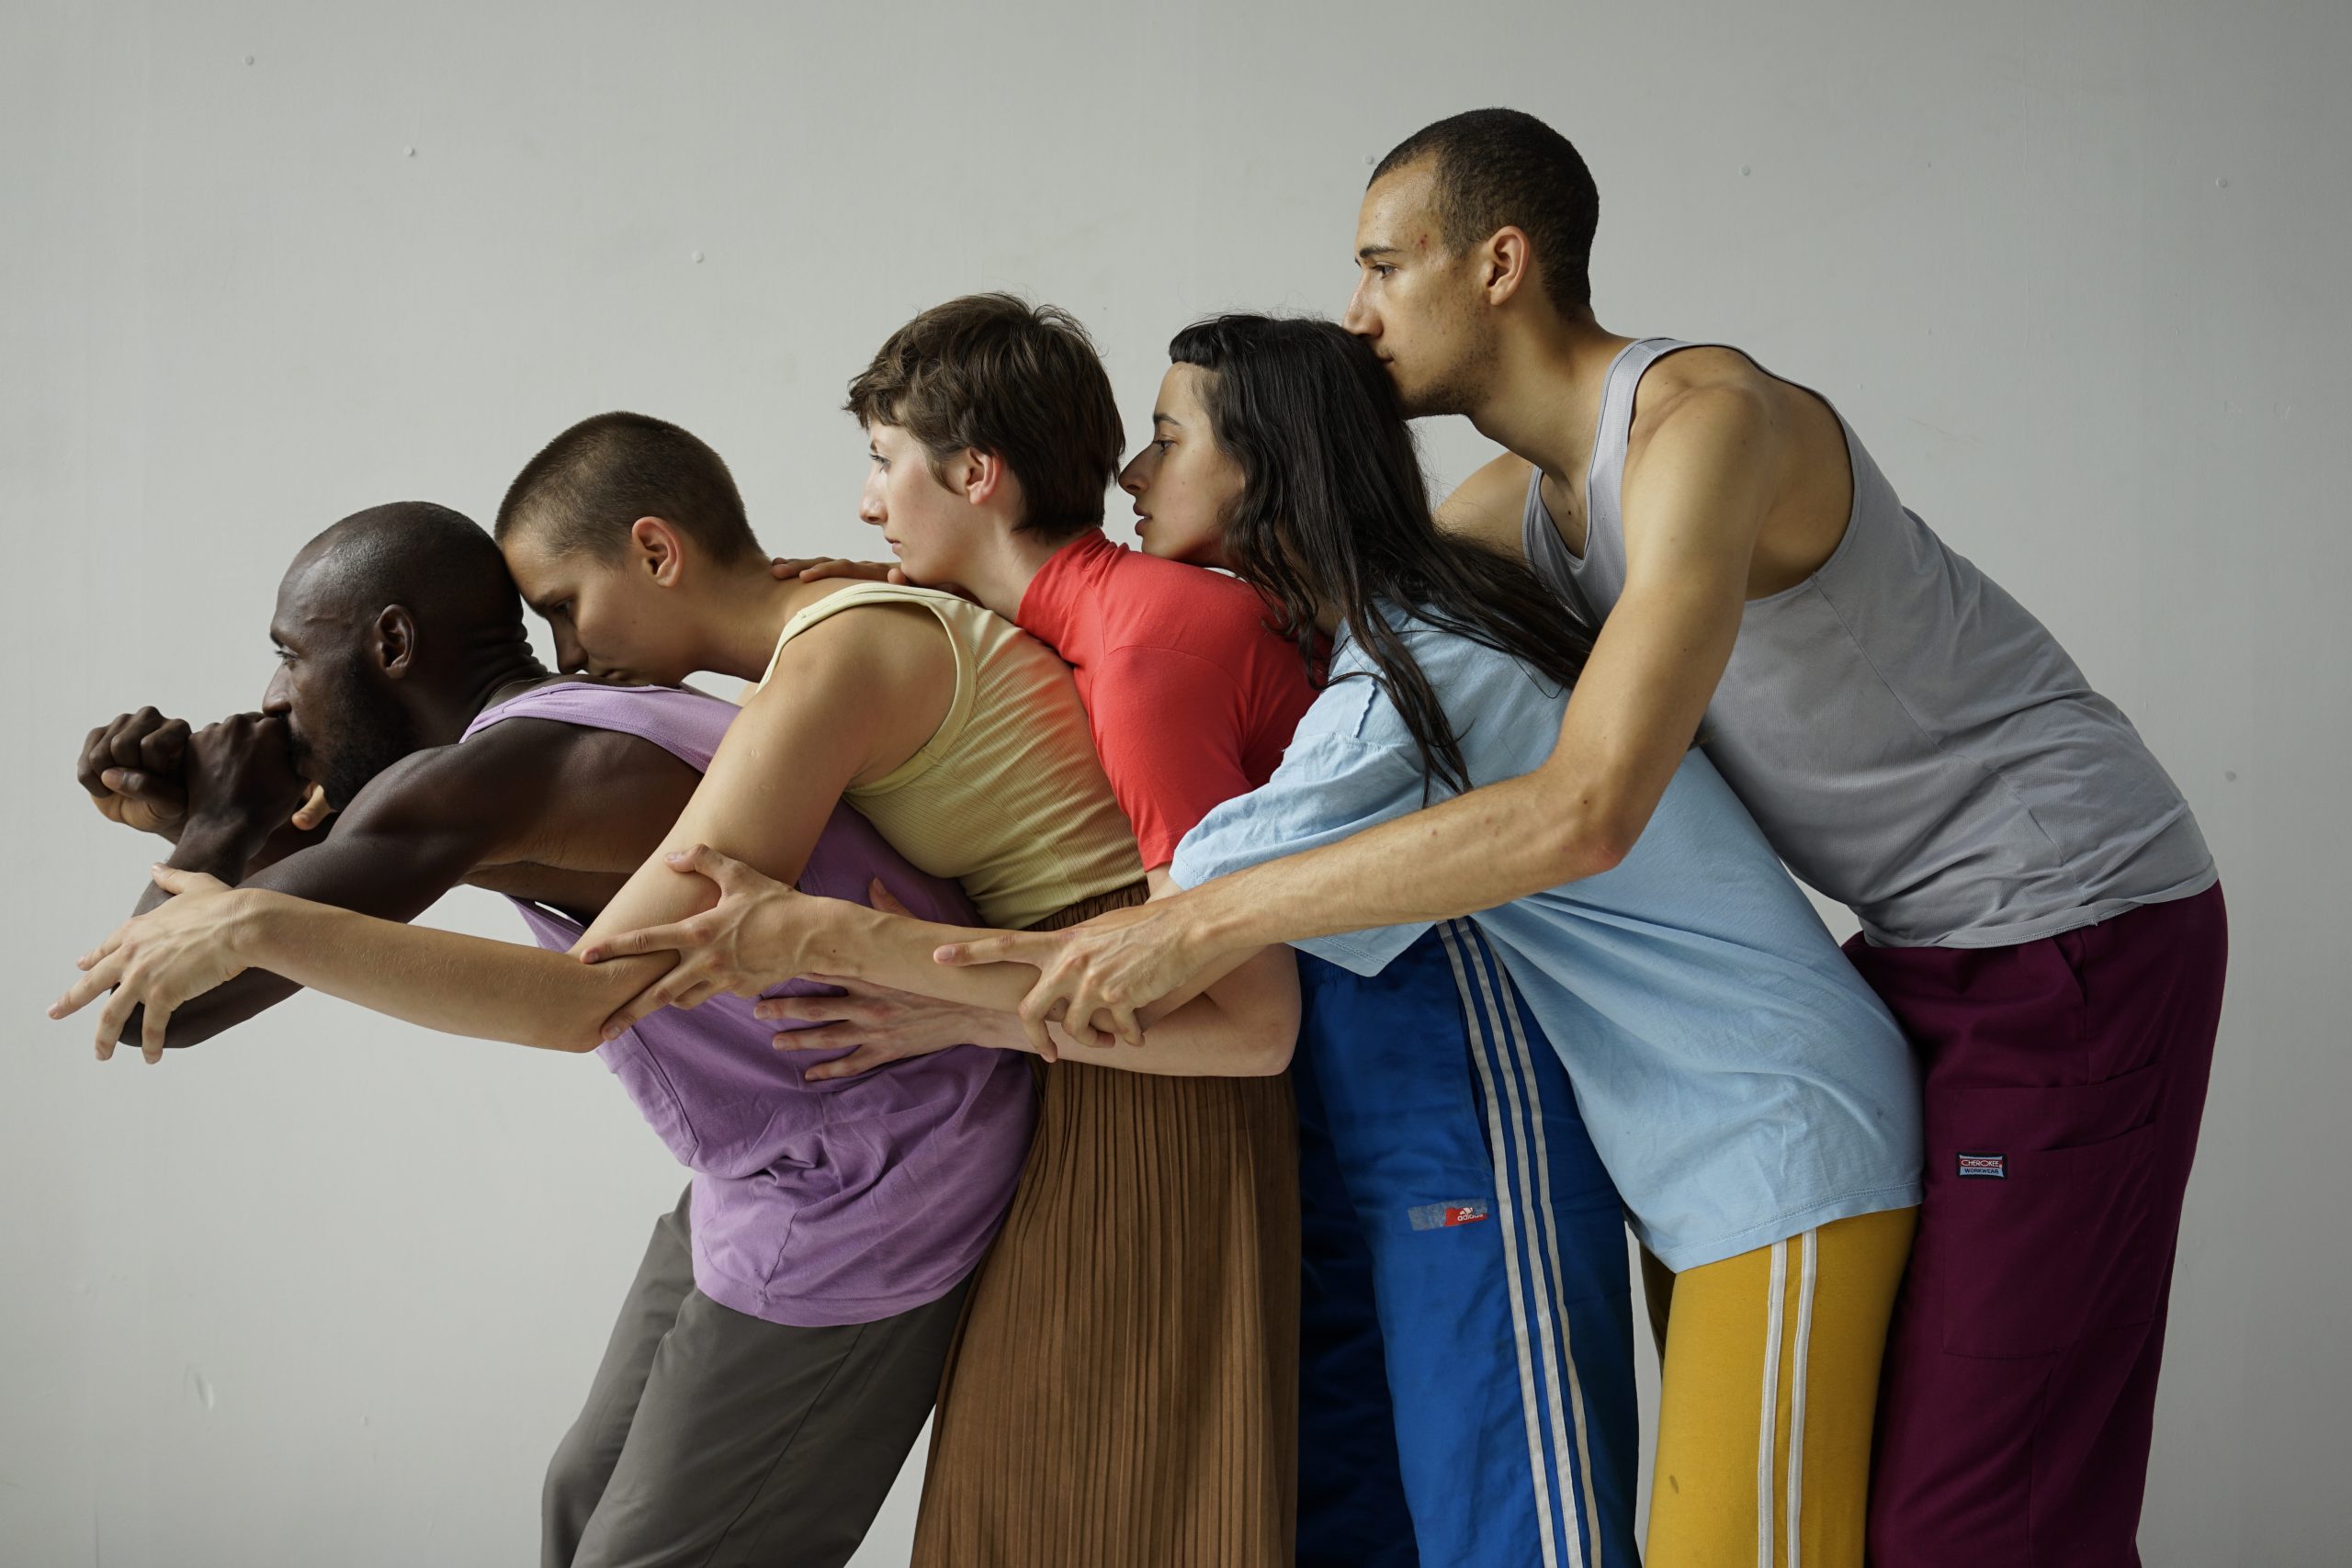 Contemporary Dance Trust Ltd (The Place): The Open Fund for Organisations